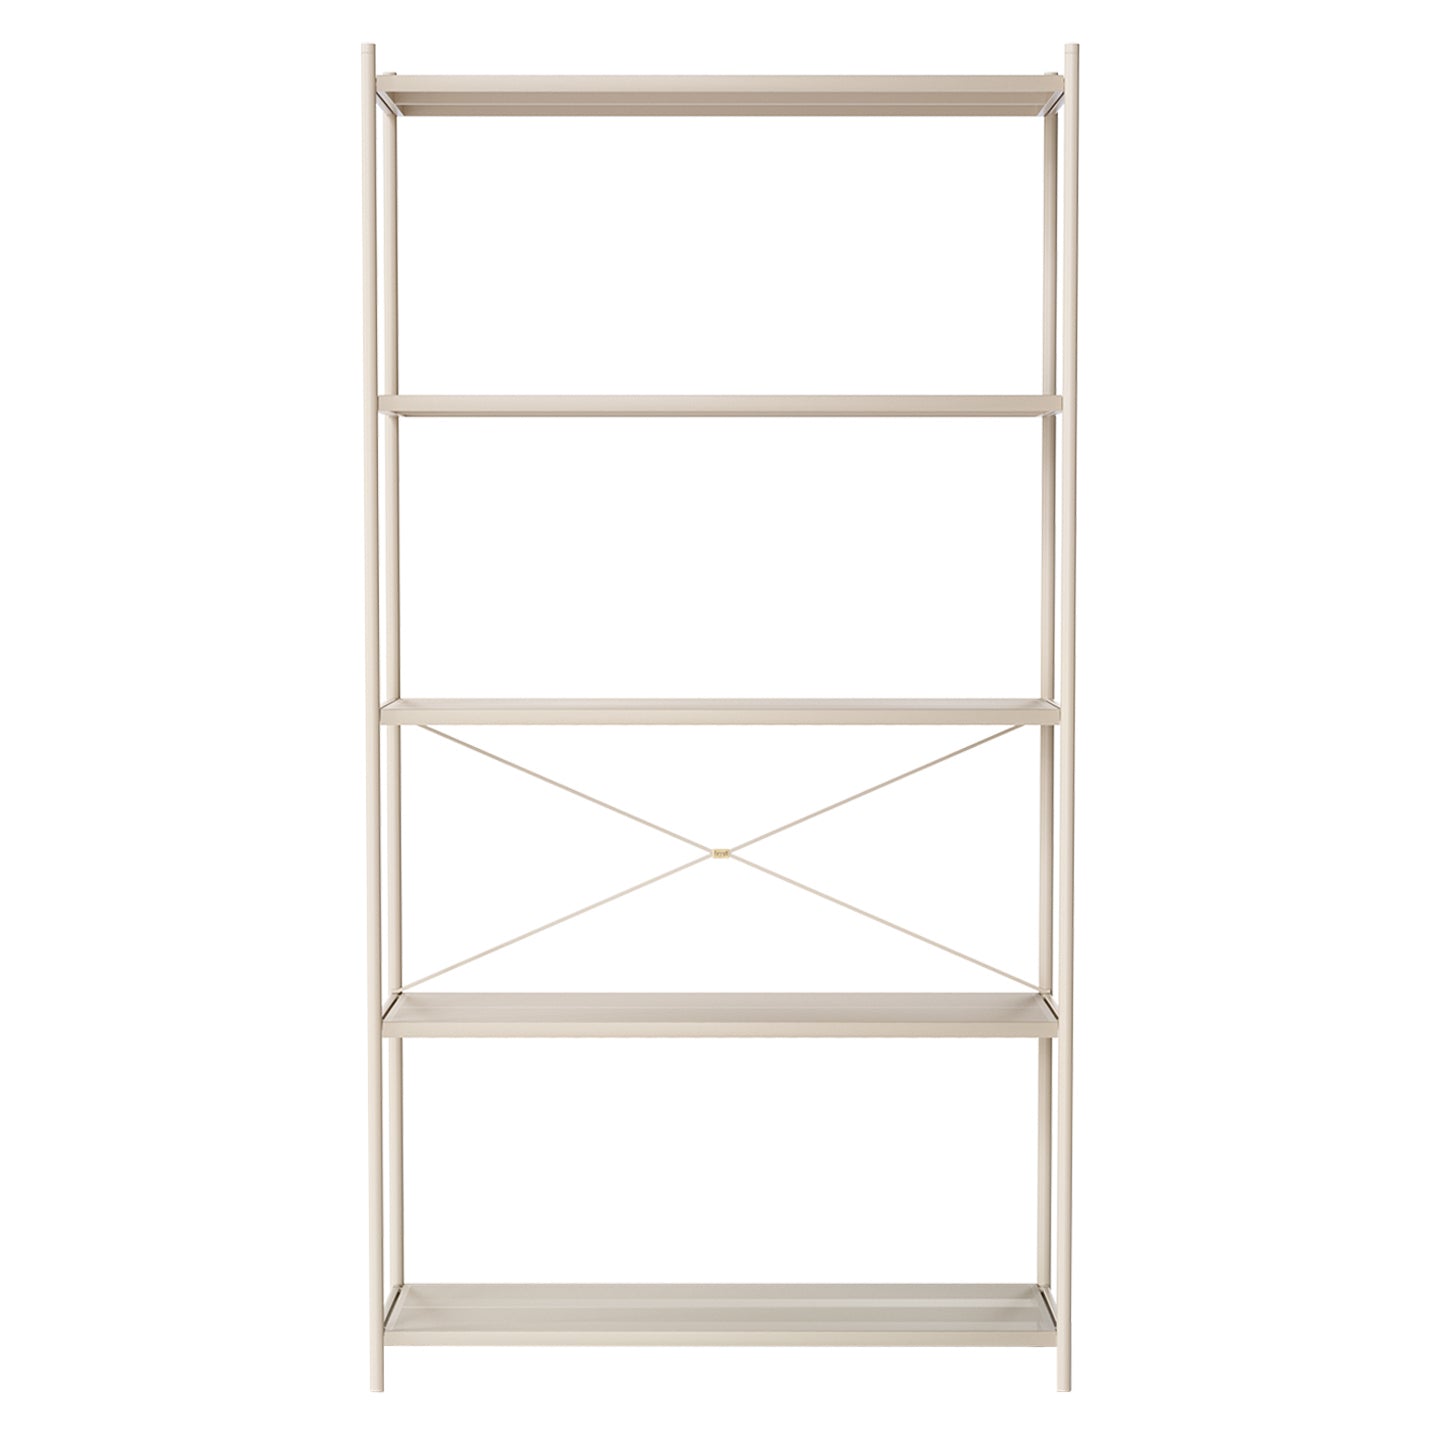 Punctual Shelving System: Configuration 4 + Cashmere (Perforated)